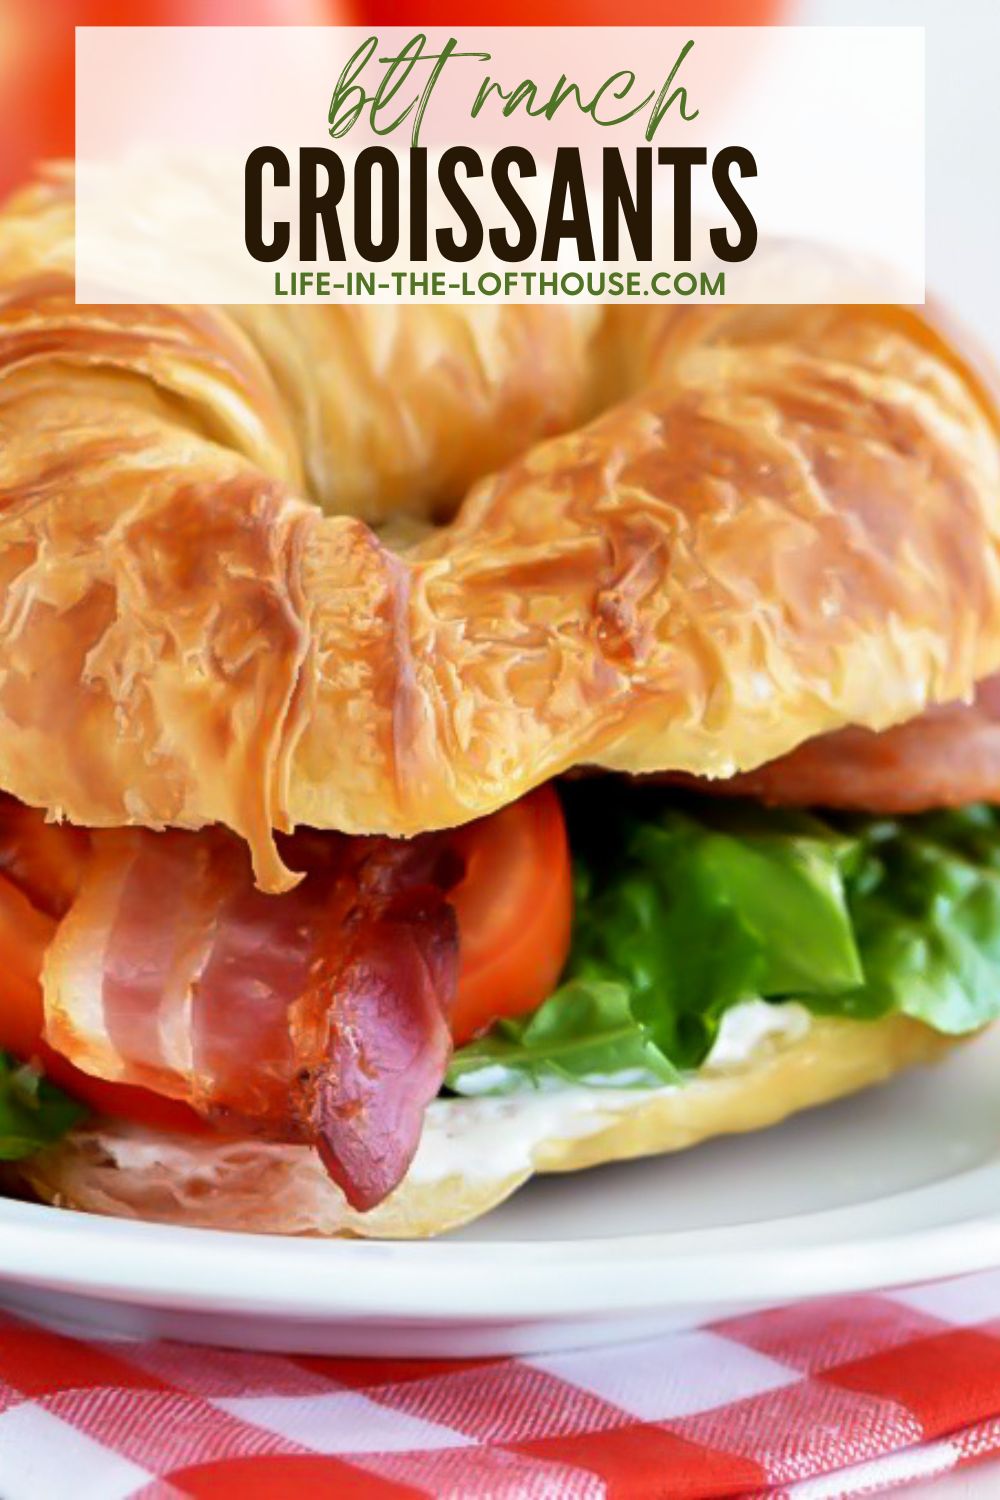 Bacon, lettuce and tomato croissants